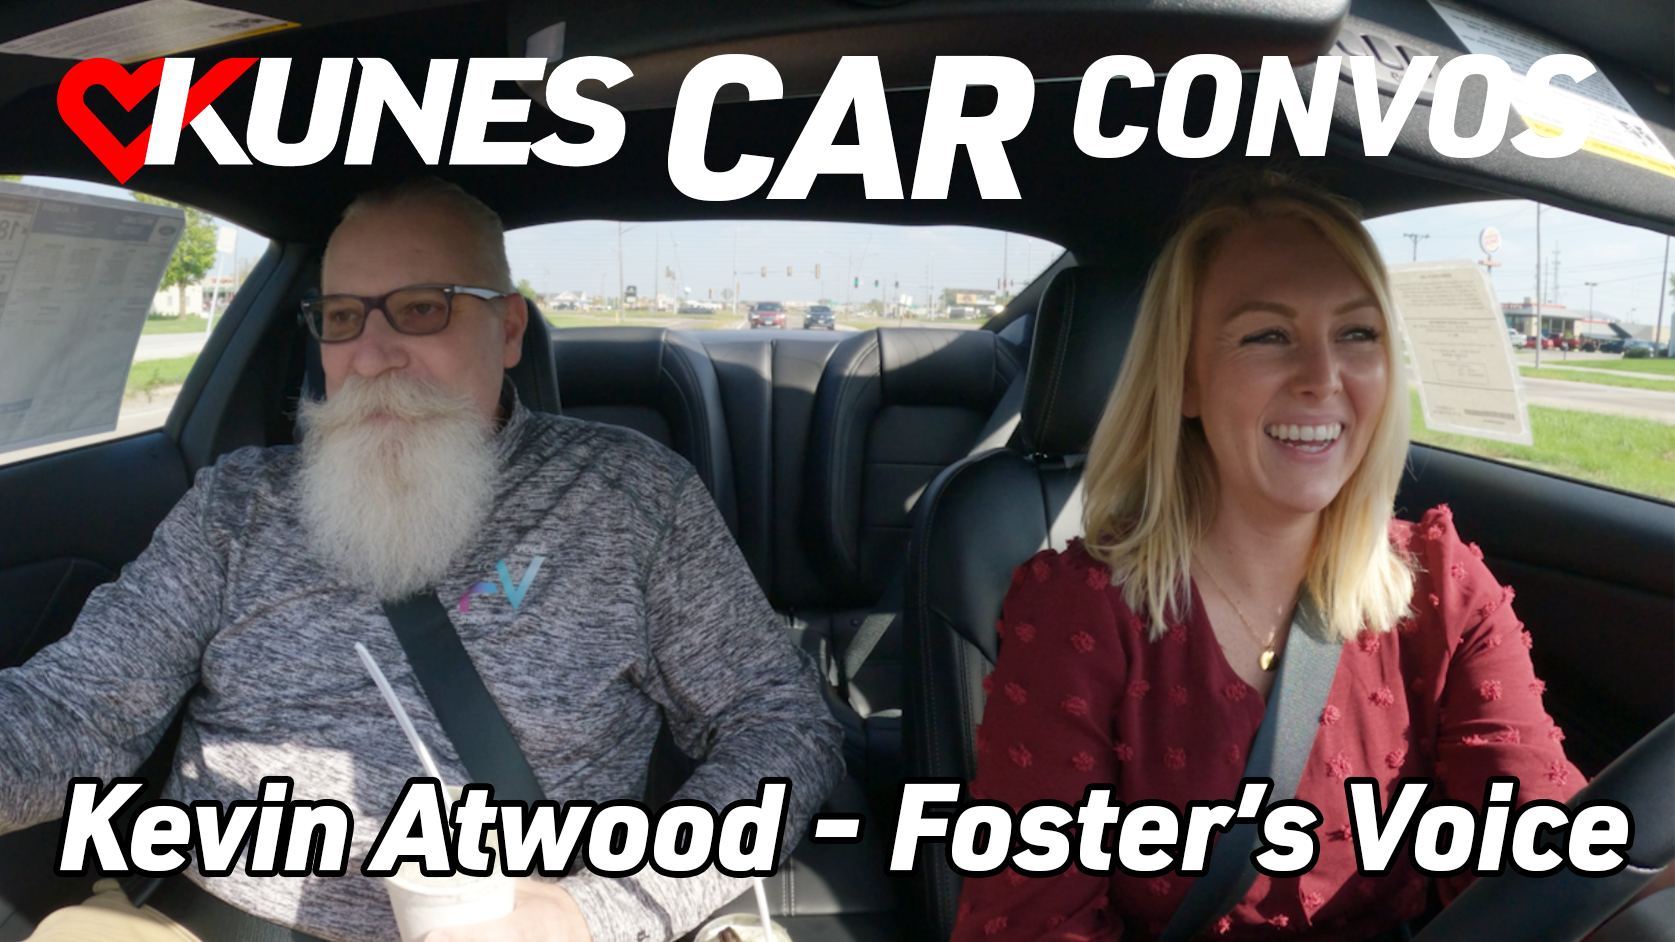 Kunes Car Convos, Kevin Atwood - Foster's Voice